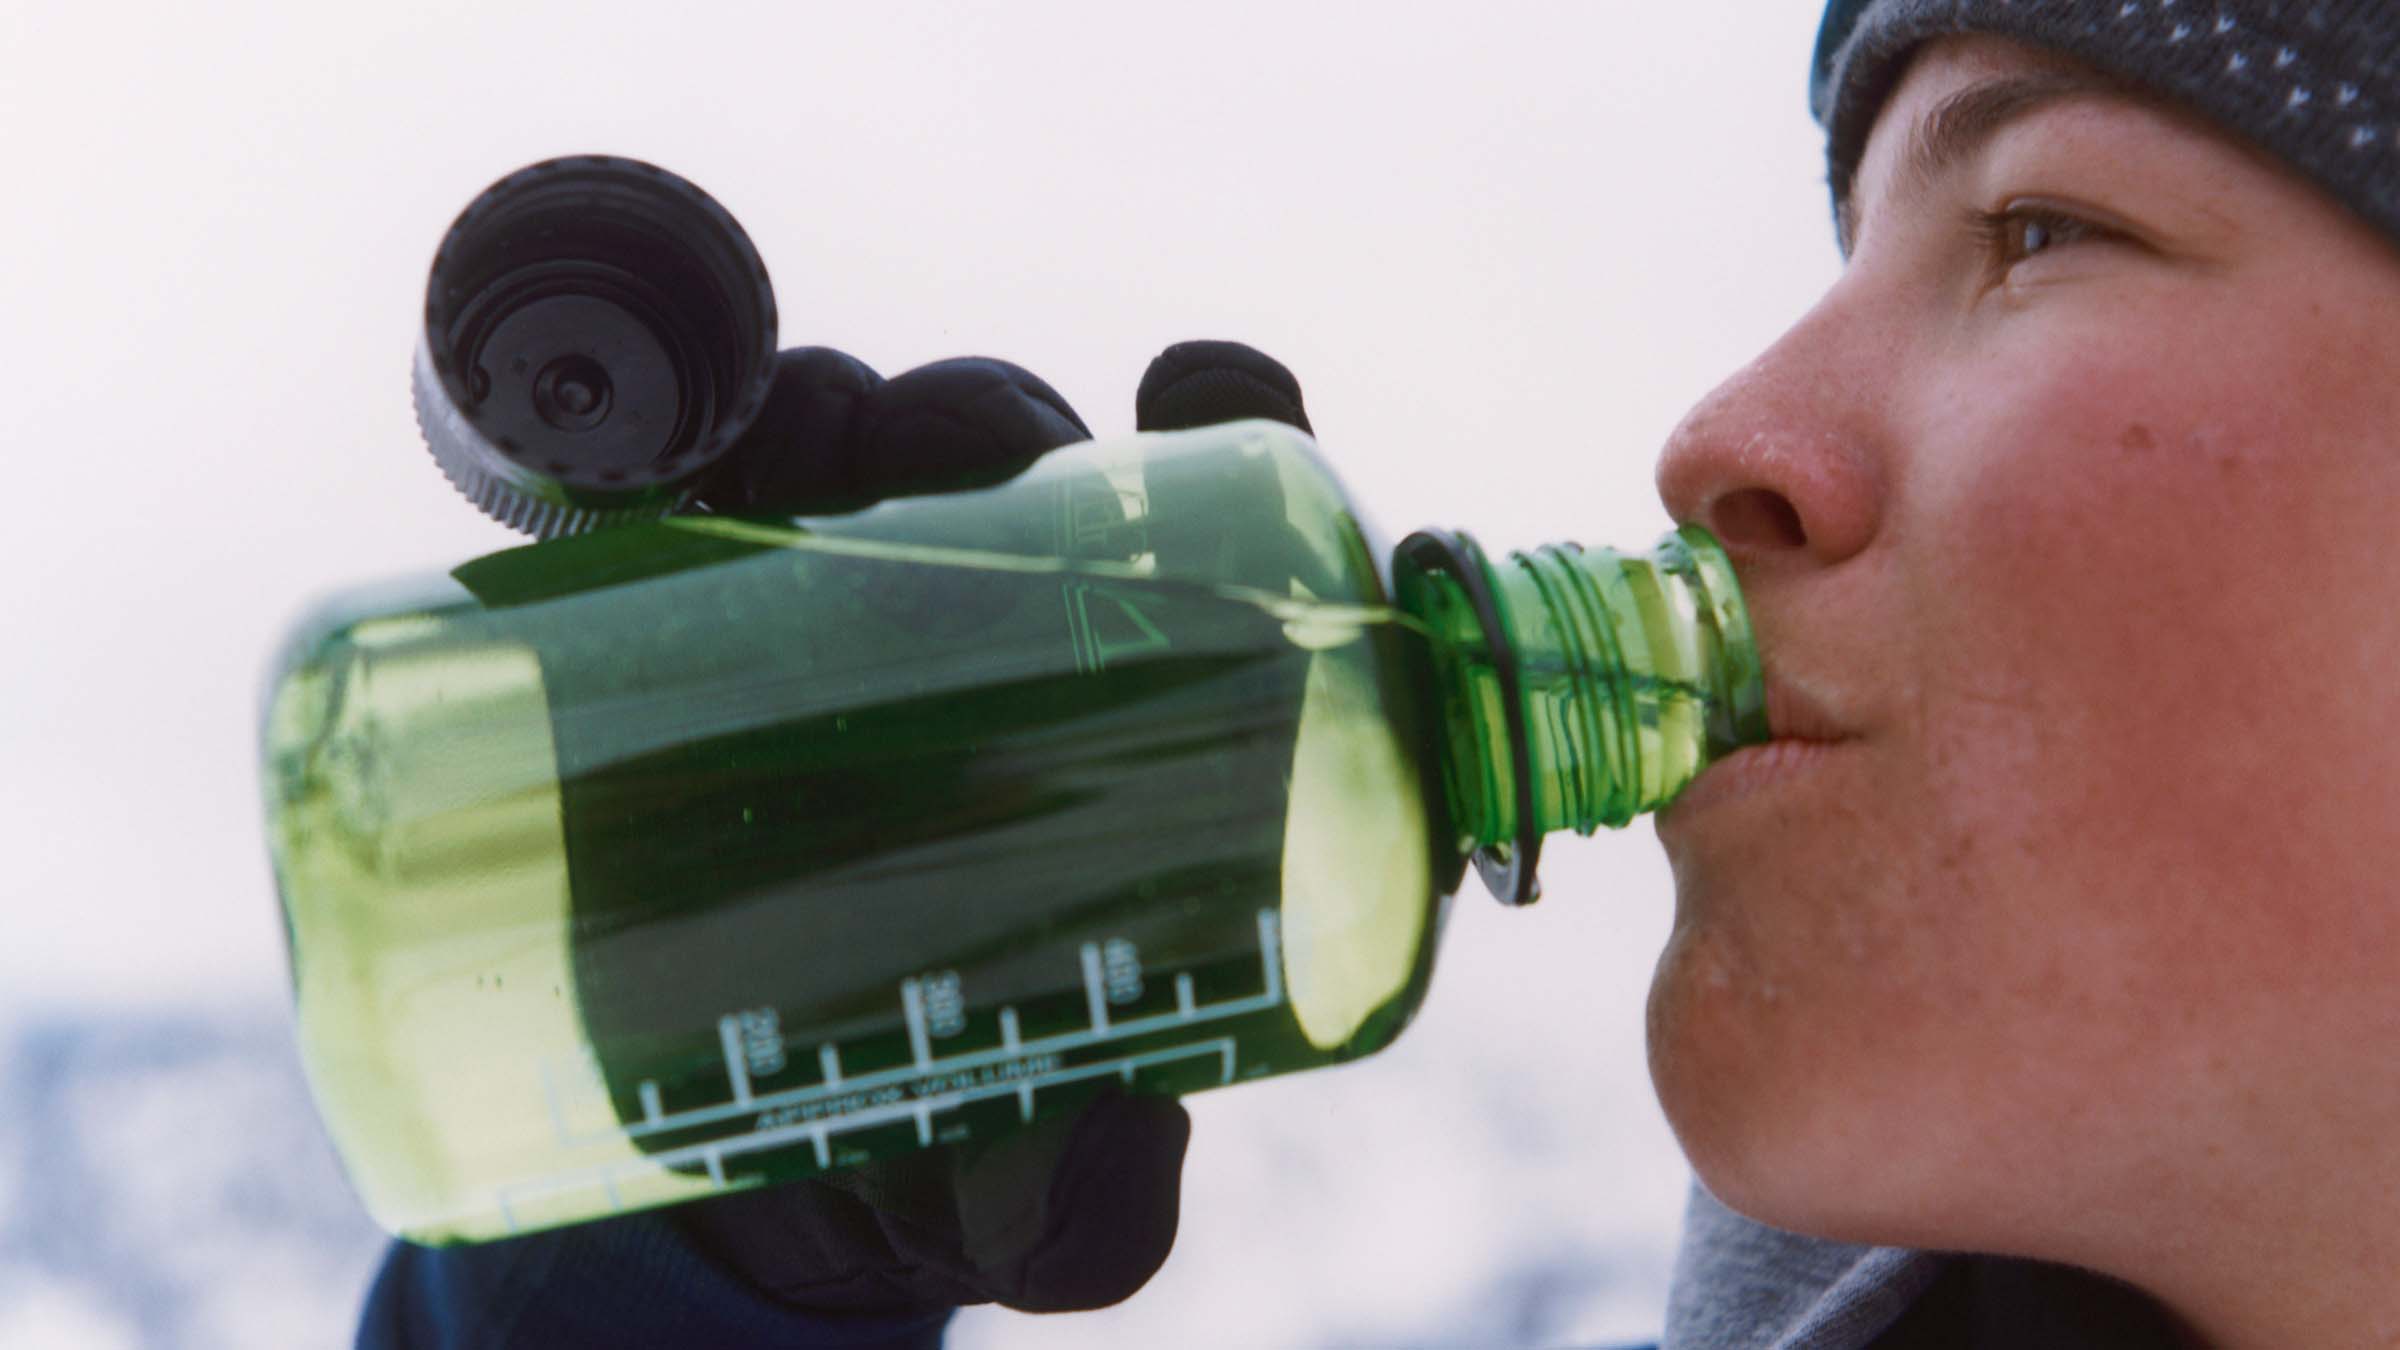 How to Keep Your Water Bottle Cold All Day in the Summer